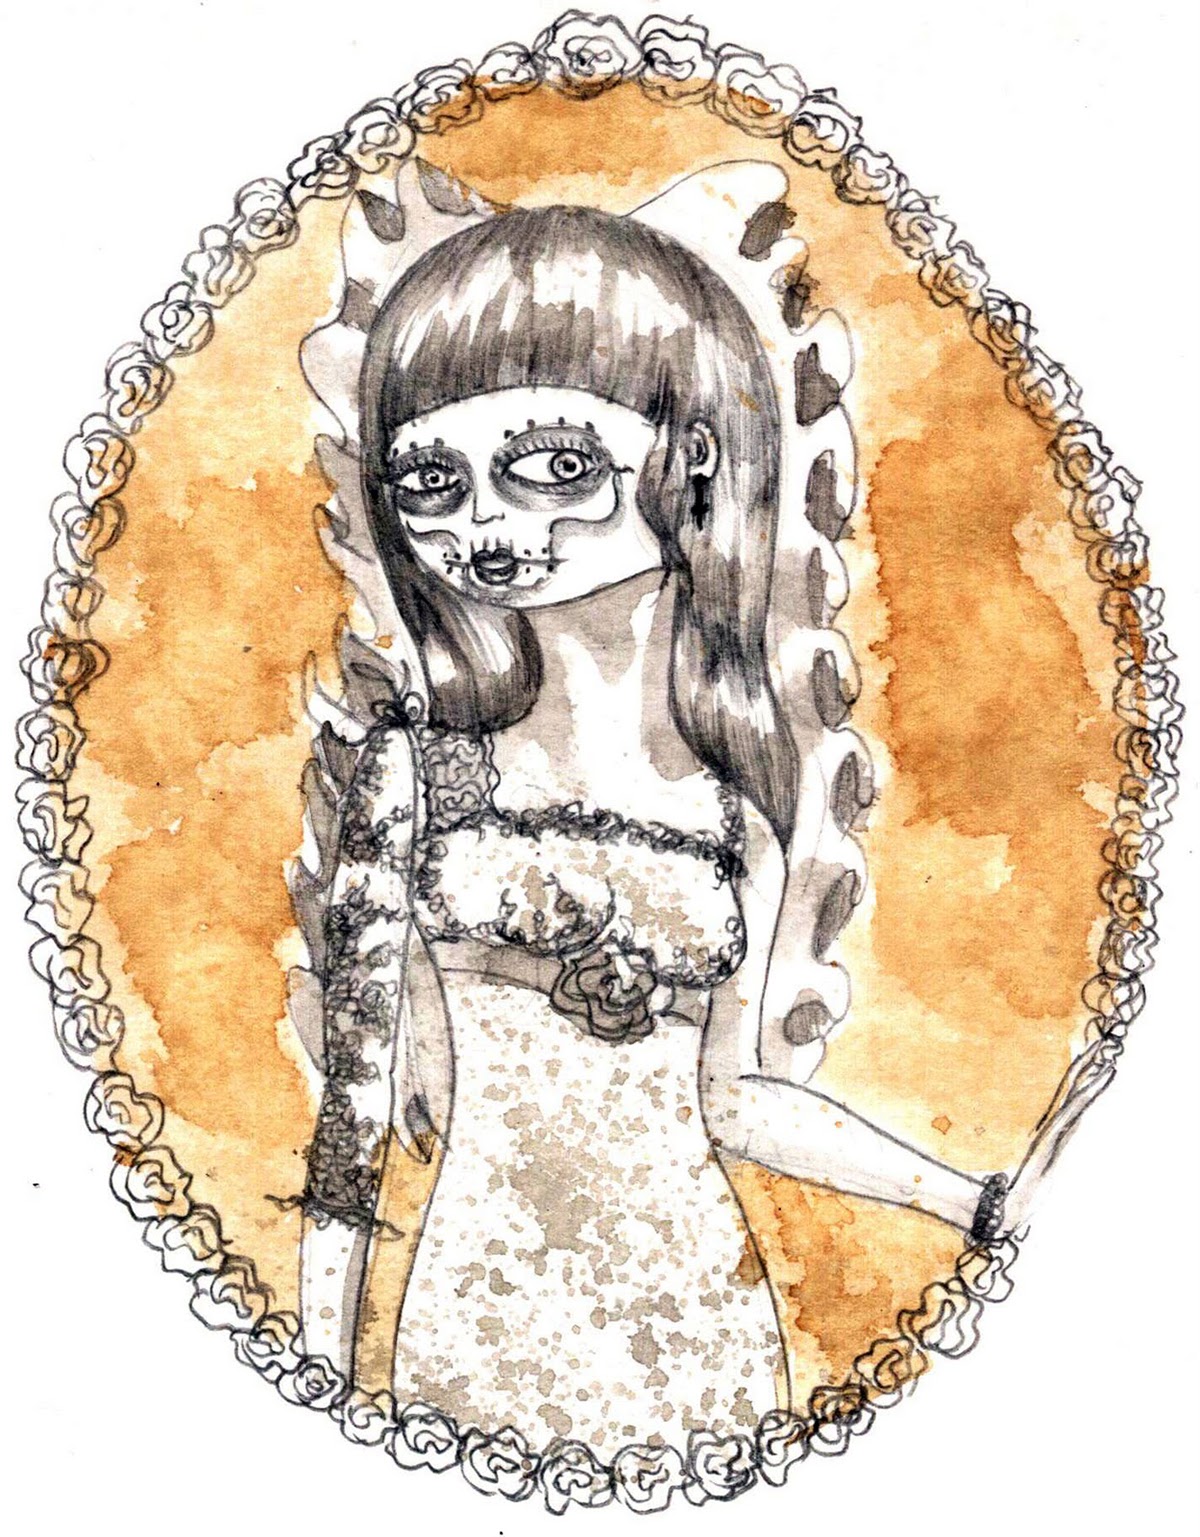 chocolate  coffee  Tequila   dead day of ilustracion  muerte   girls  chicas  wedding  monja  Noon